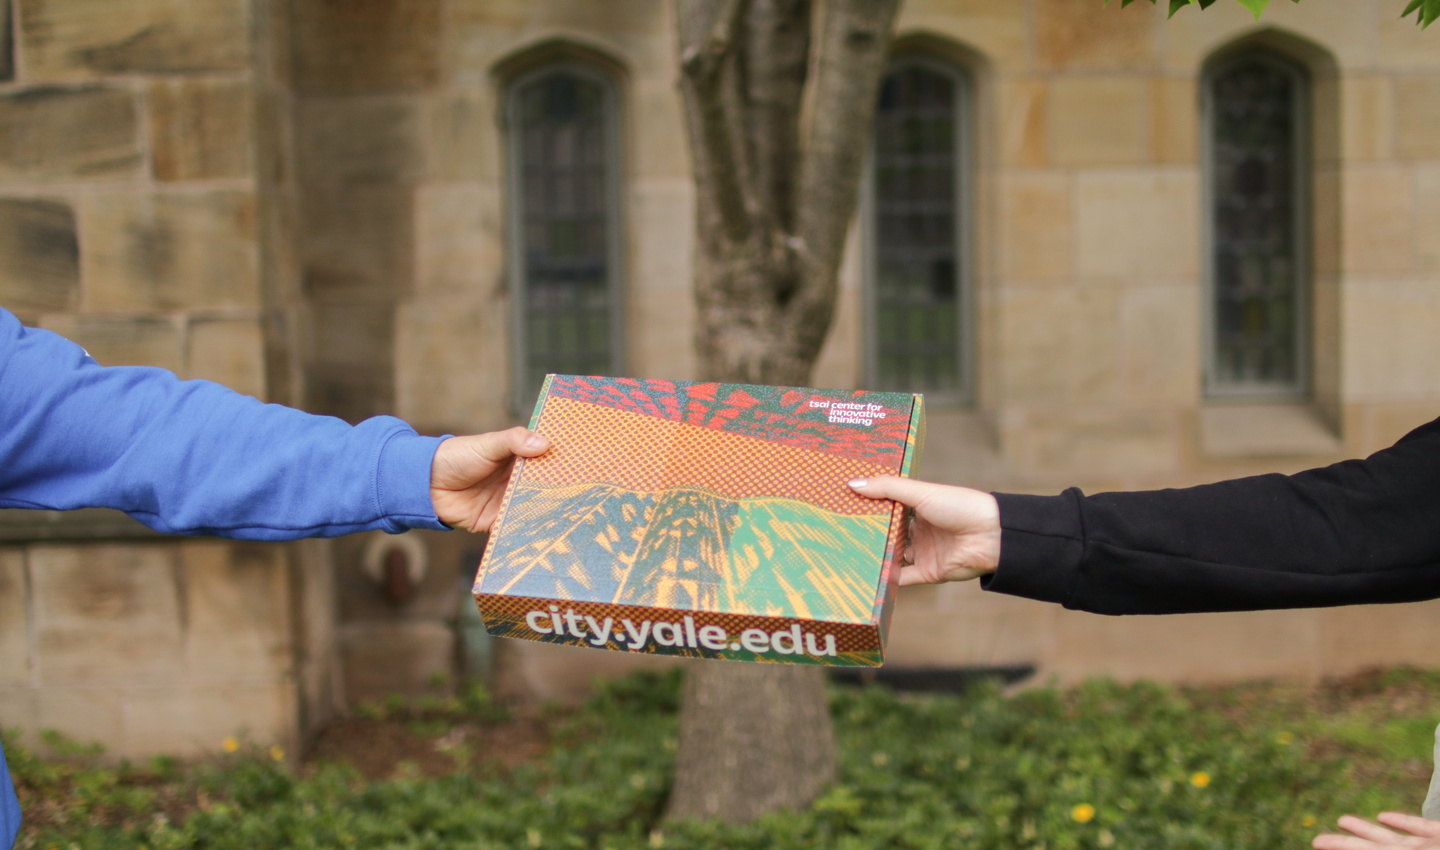 Hands pass Tsai CITY-branded box on Yale campus